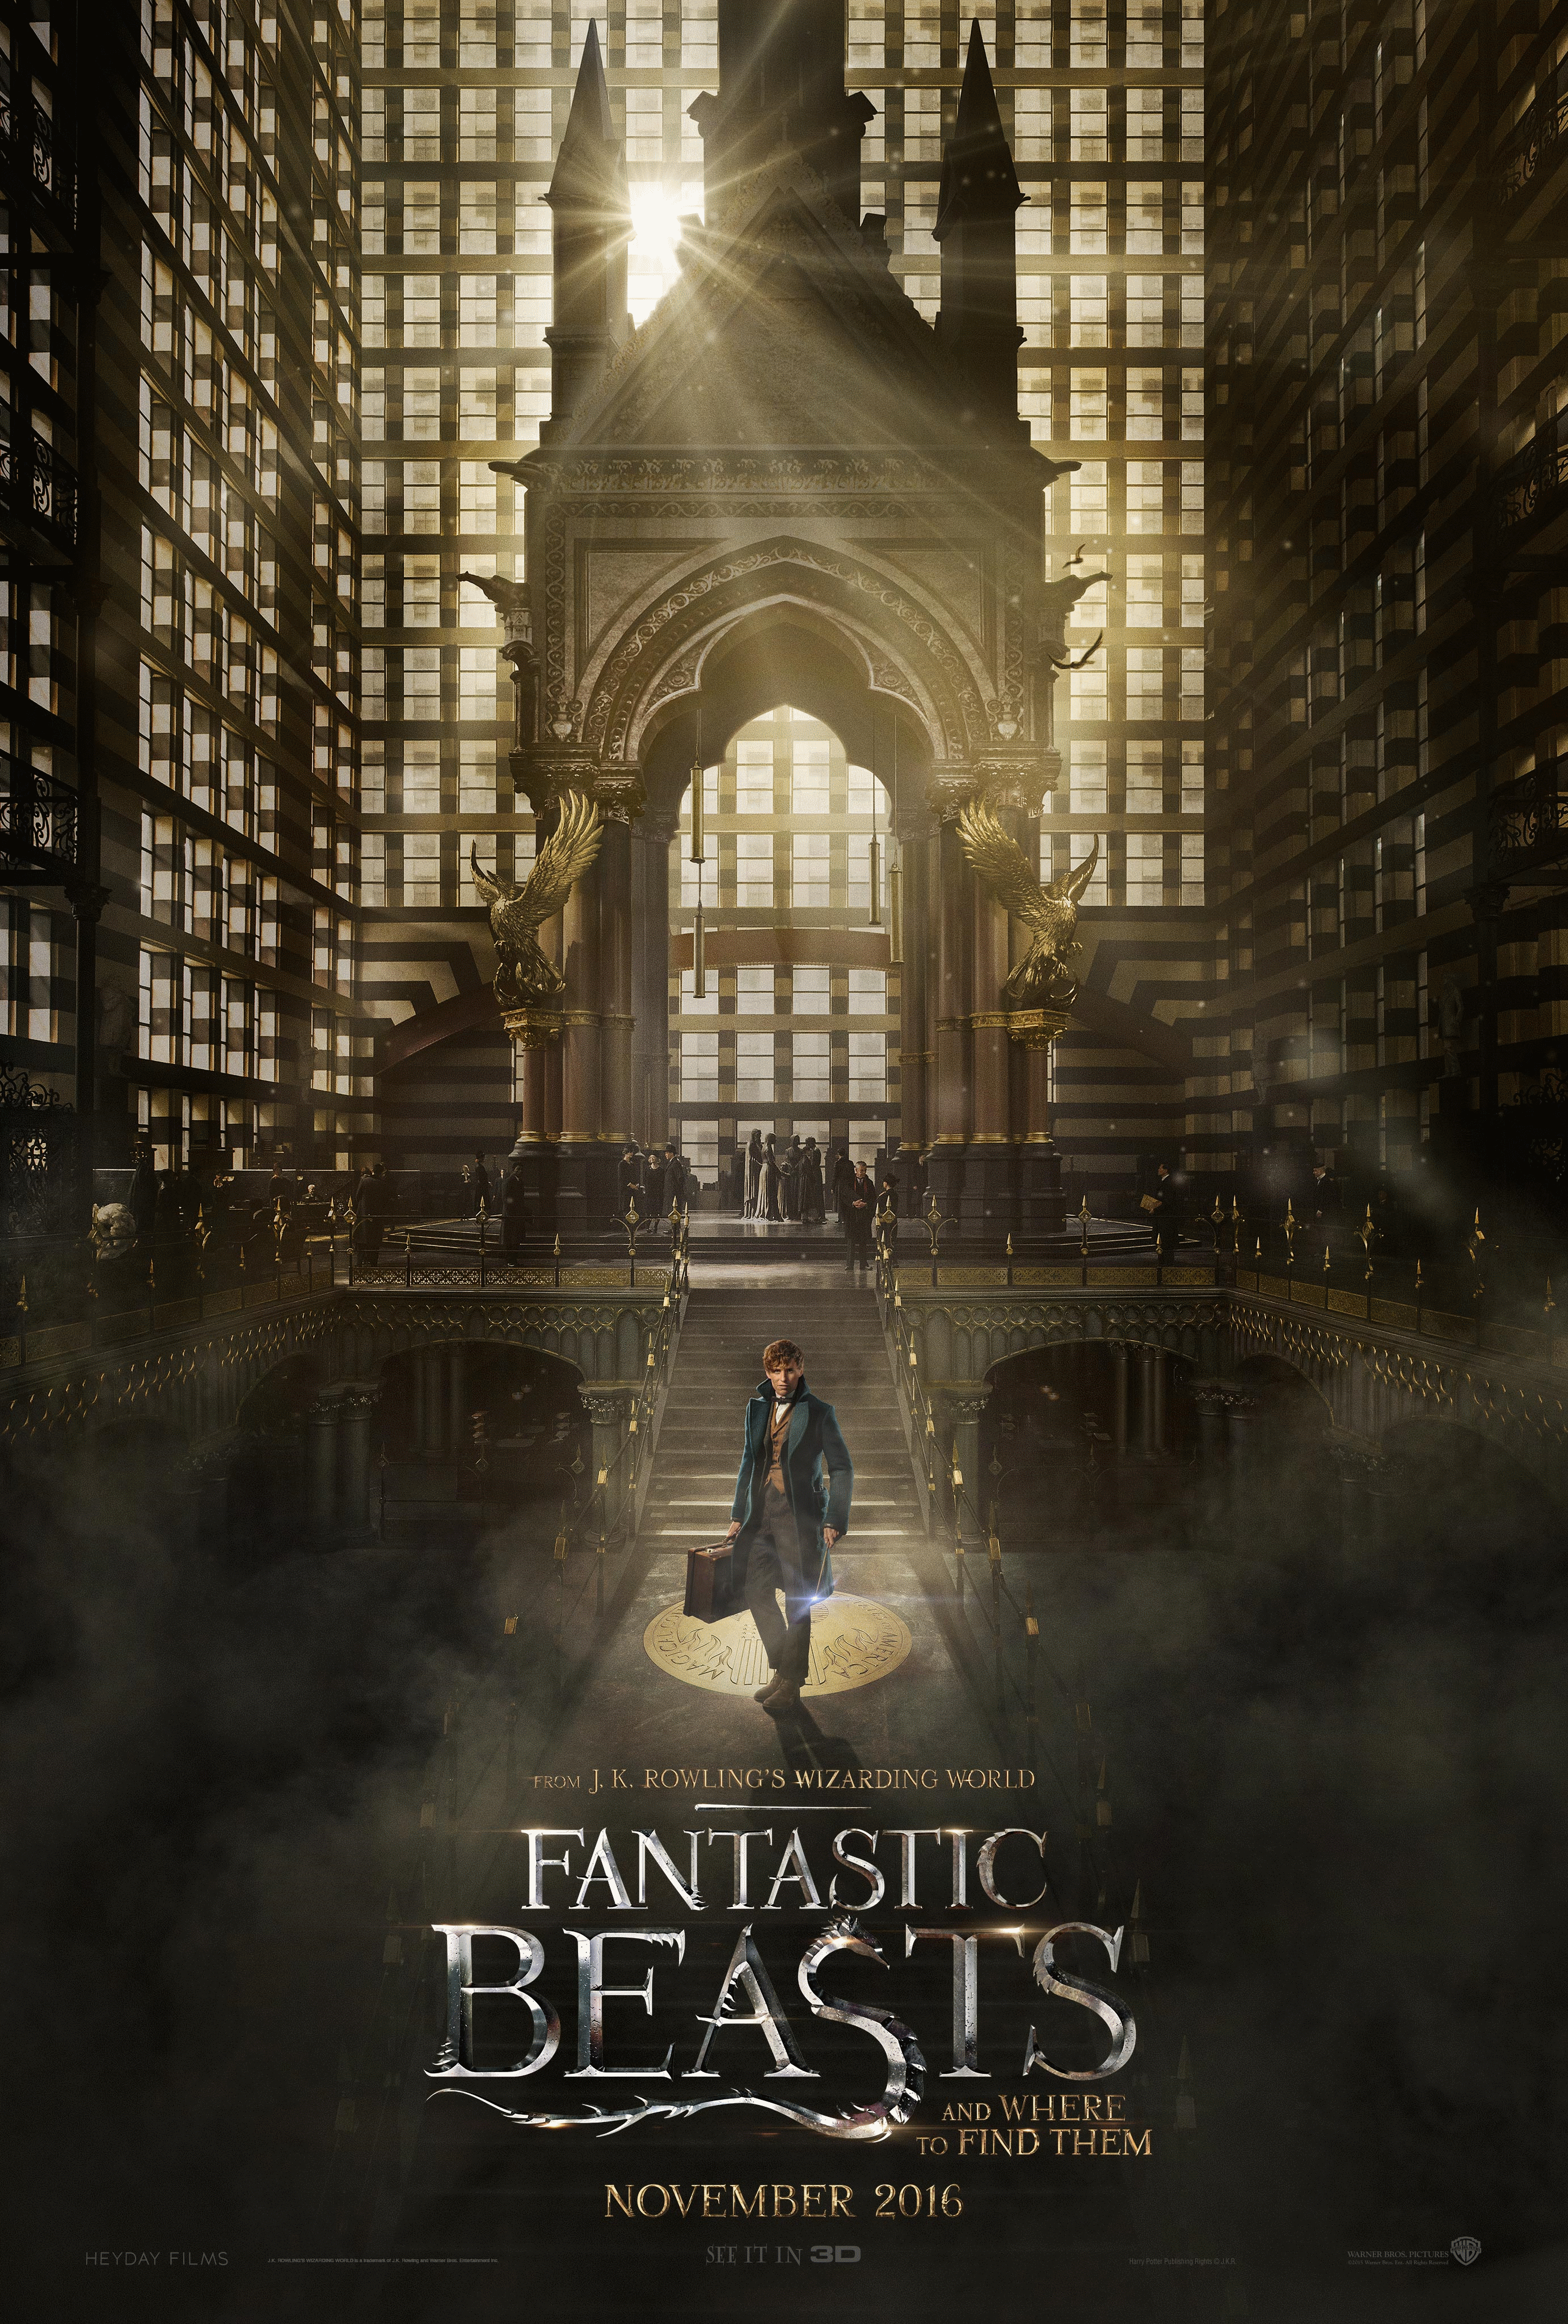 Fantastic Beasts and Where to Find Them (film) | Harry Potter Wiki | Fandom